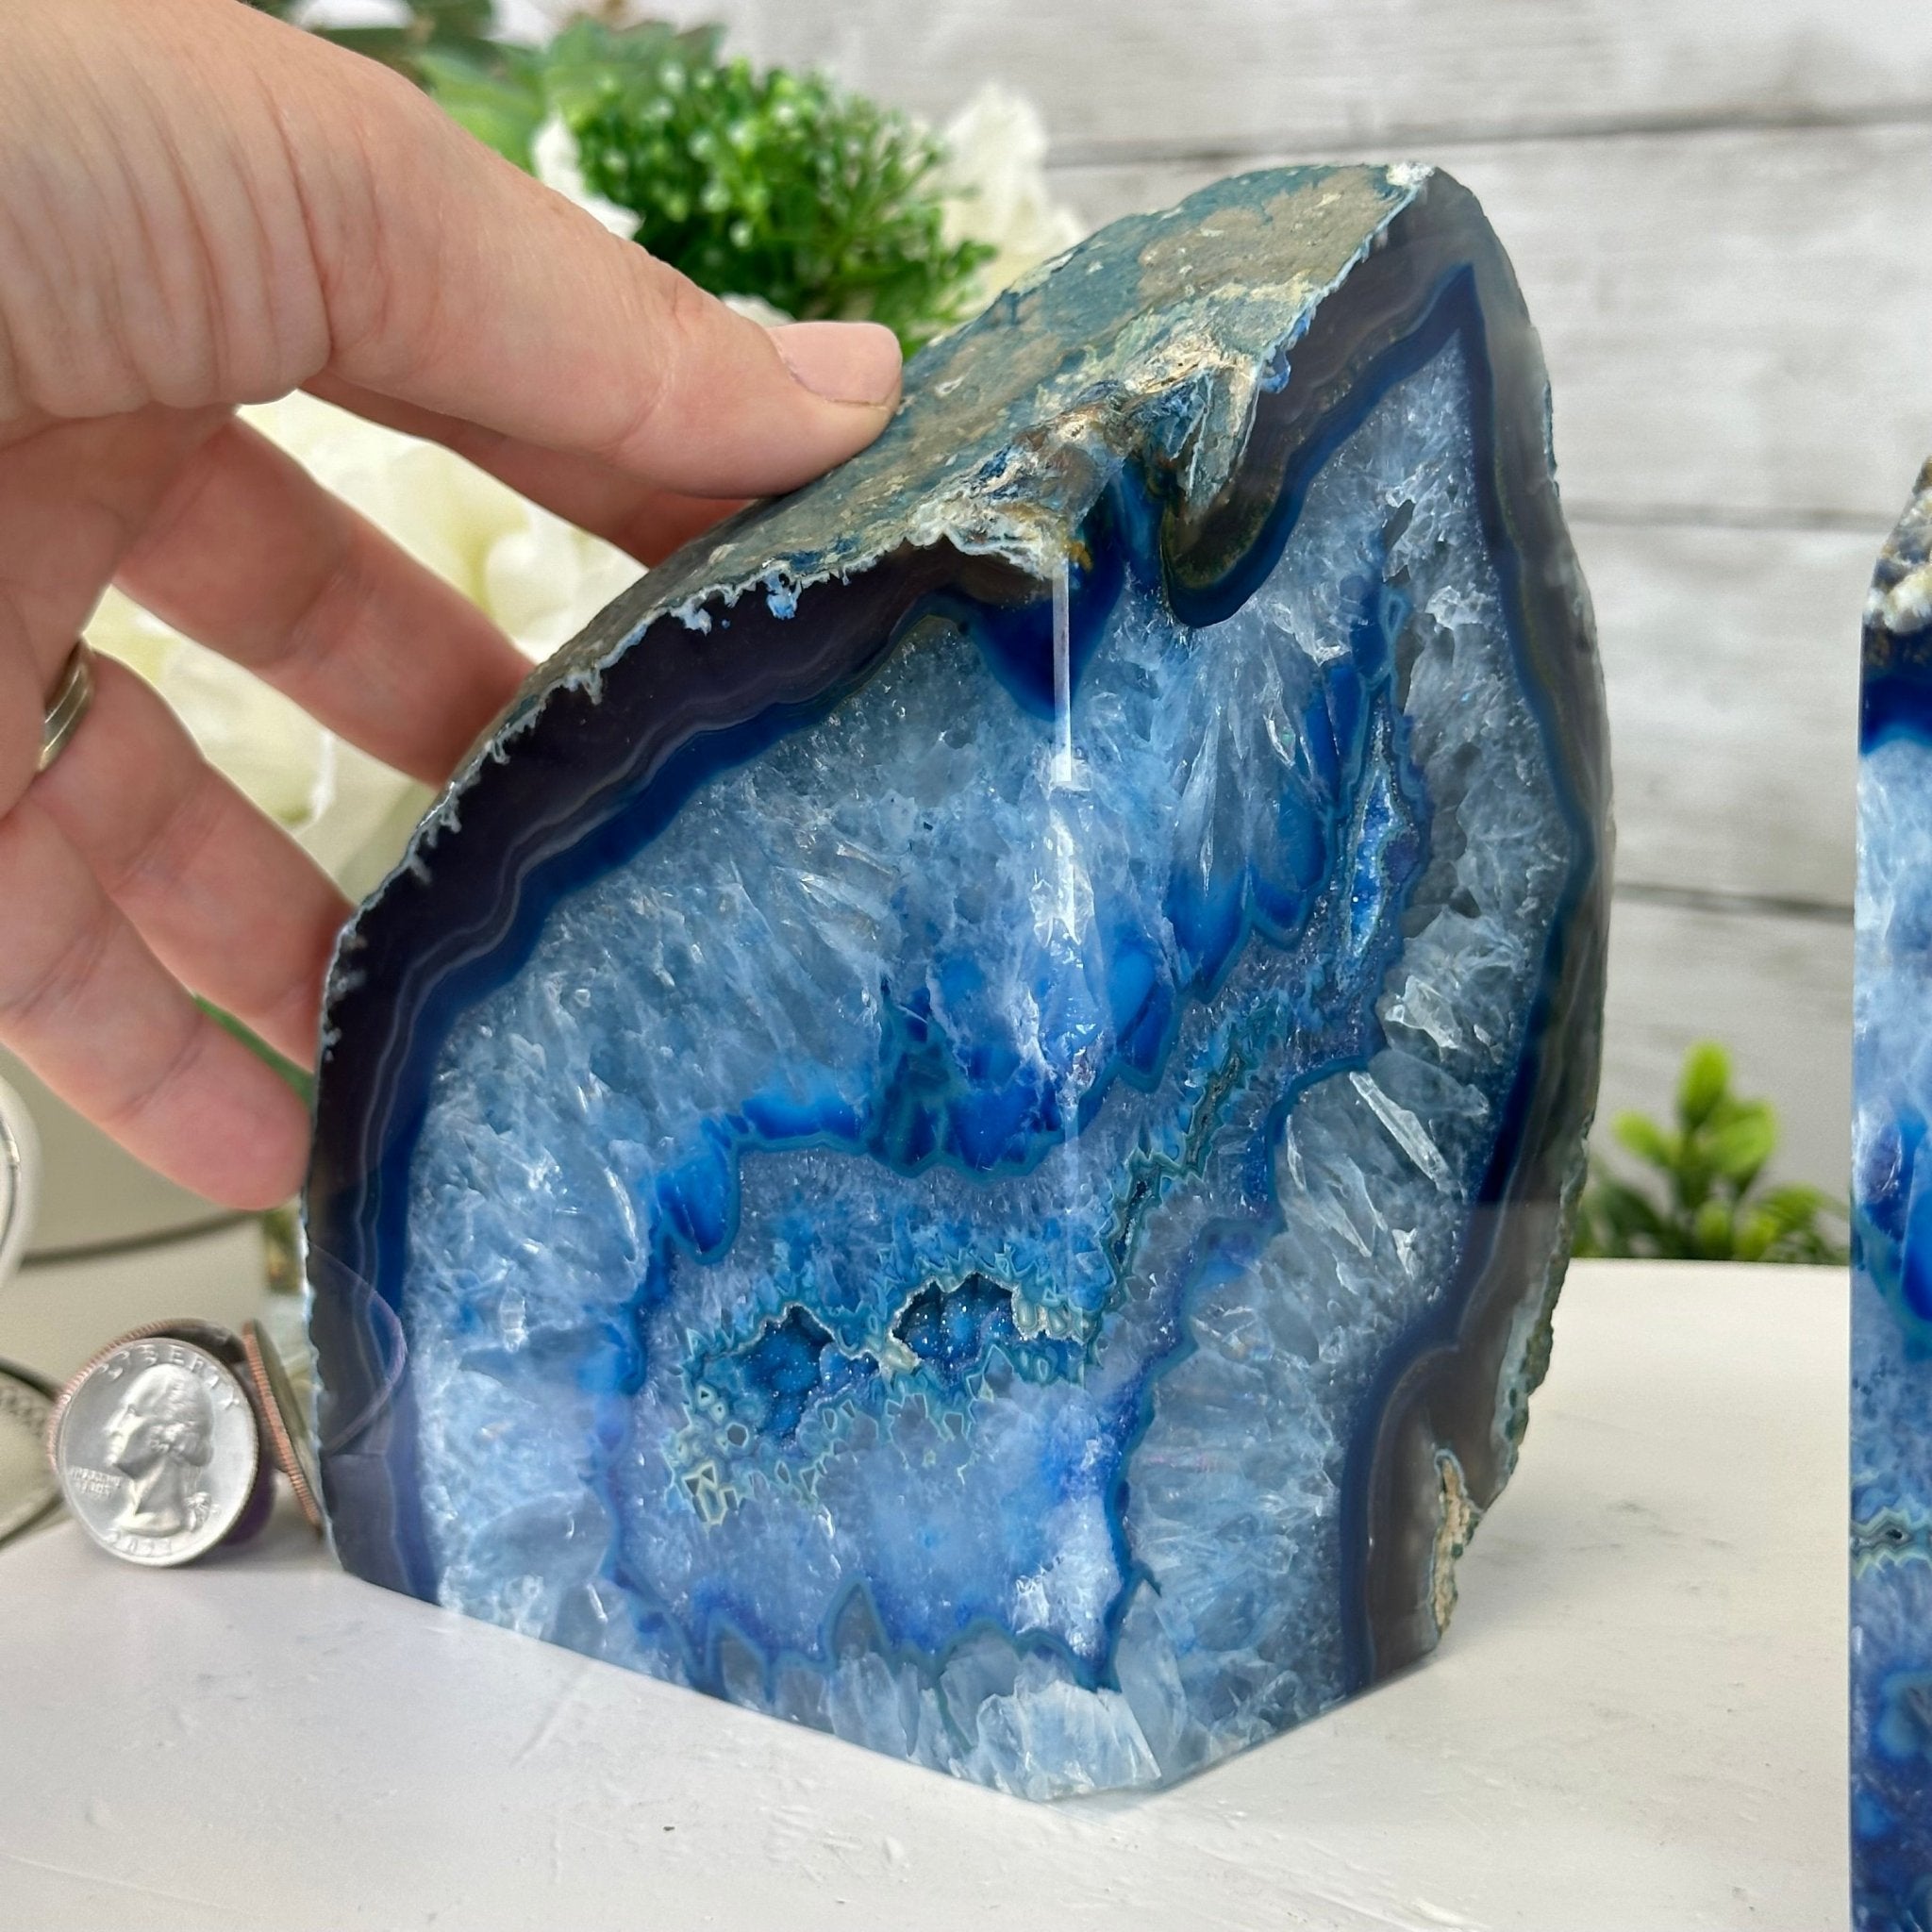 Blue Dyed Brazilian Agate Stone Bookends, 10.7 lbs & 5.7" tall #5151BL-042 - Brazil GemsBrazil GemsBlue Dyed Brazilian Agate Stone Bookends, 10.7 lbs & 5.7" tall #5151BL-042Bookends5151BL-042